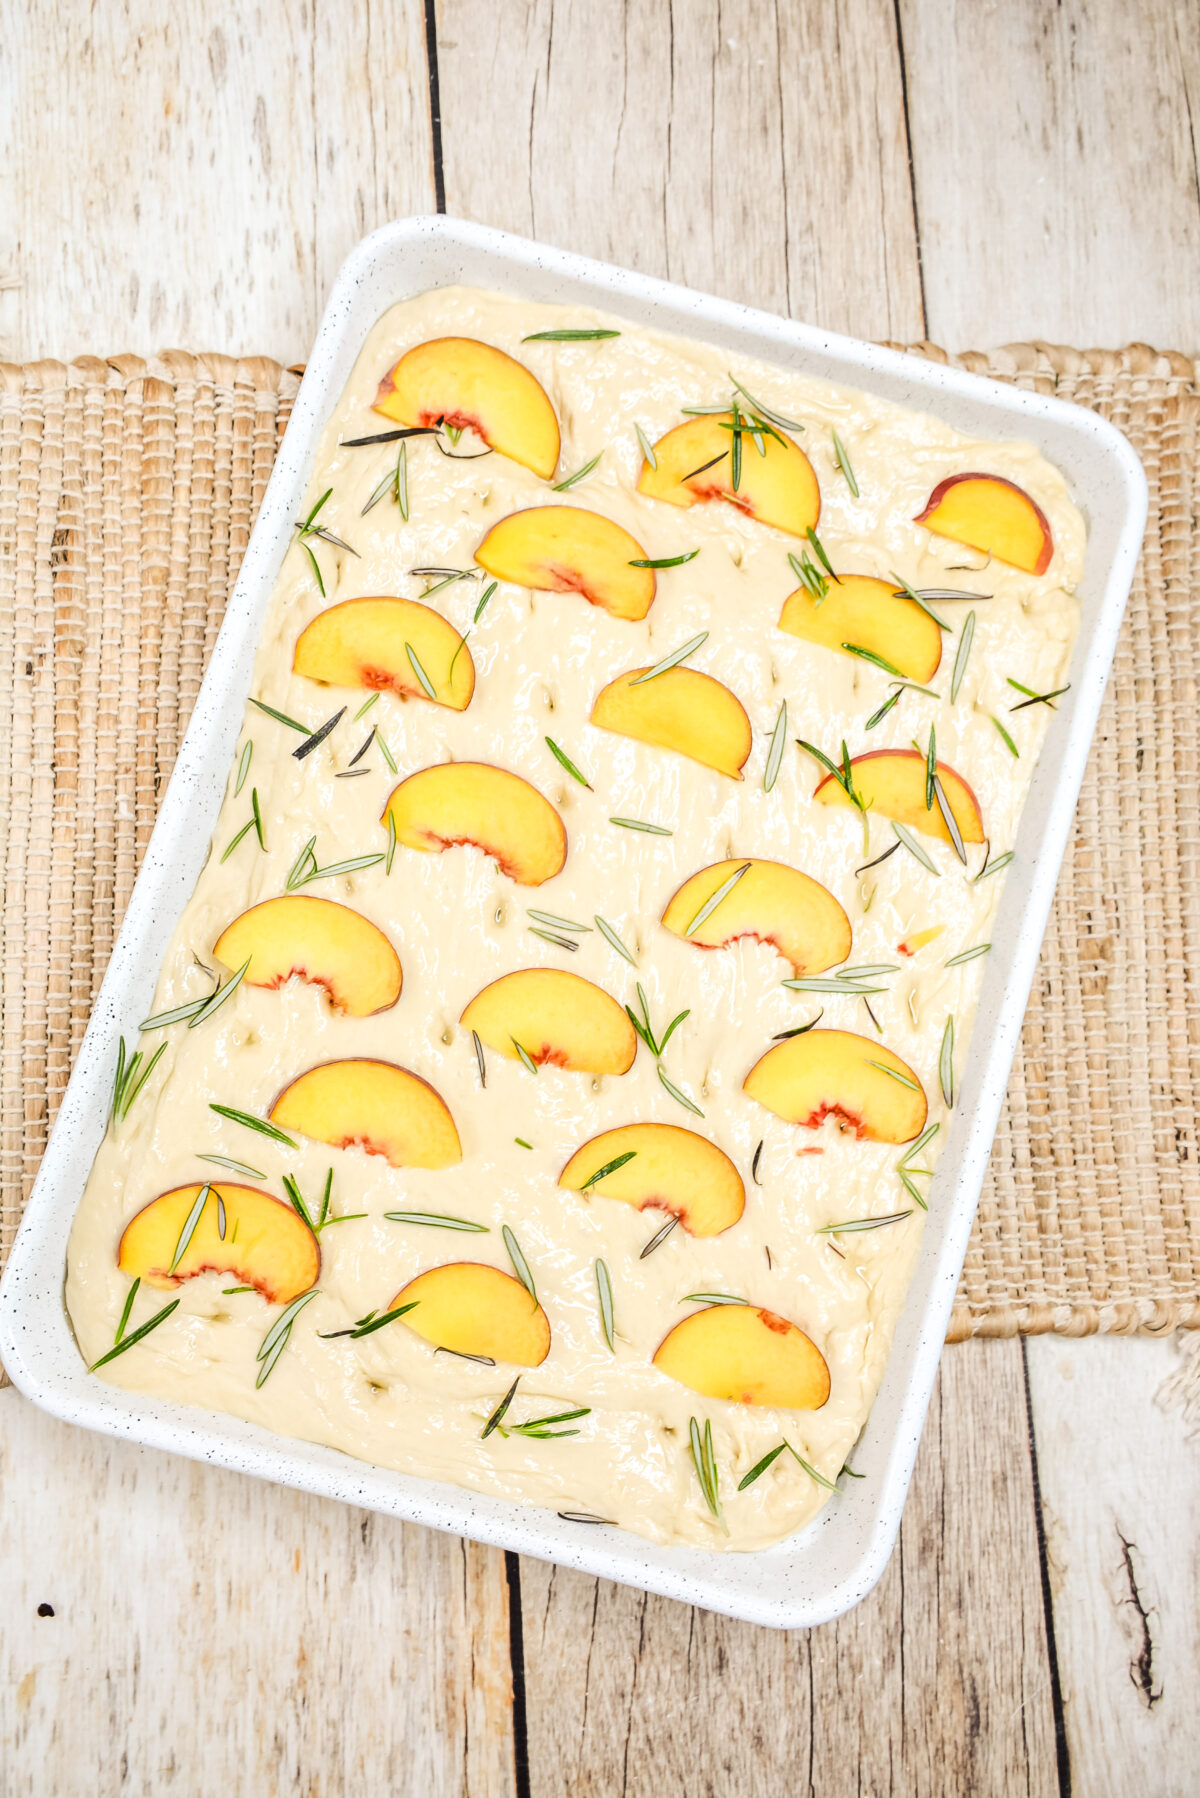 Arrange the peach slices and sprinkle over with the thyme.